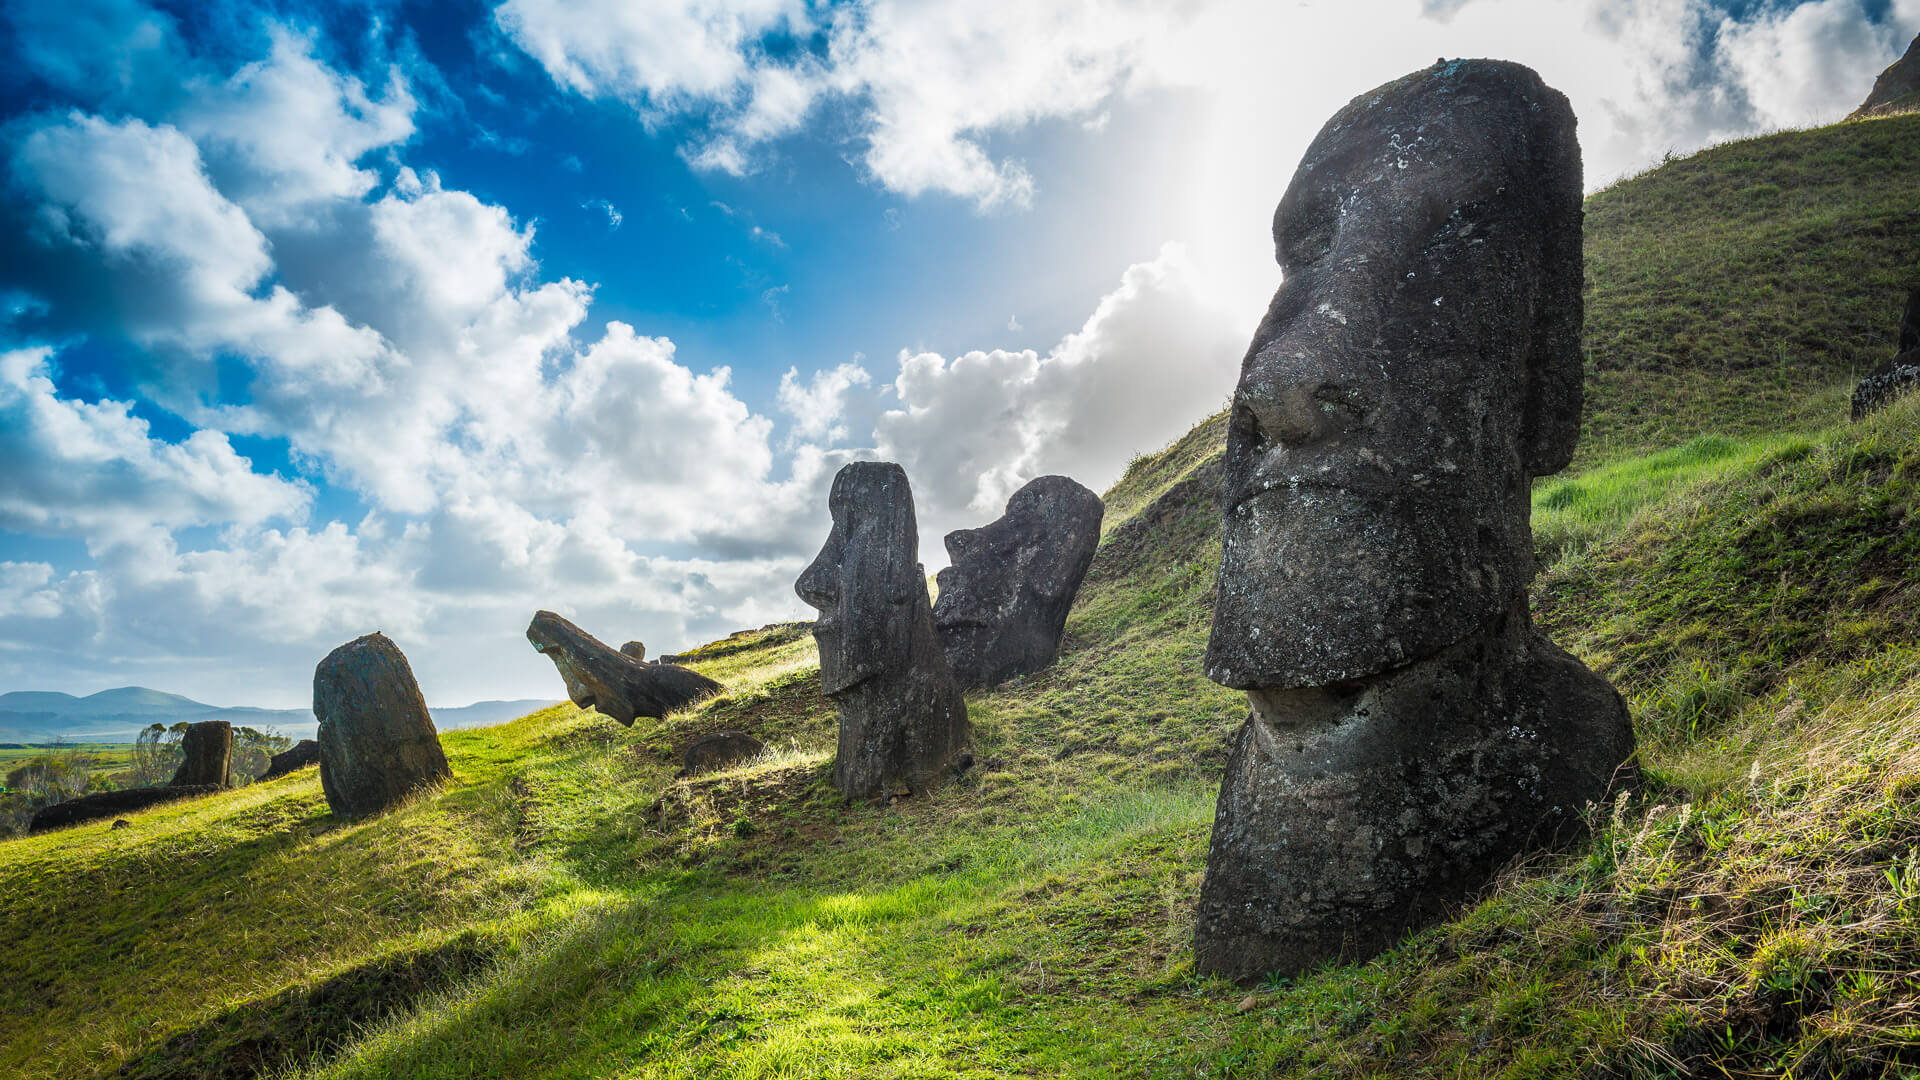 <p><strong>Estimated cost:</strong> $2,815</p> <p>Regarded as one of the most isolated islands in the world, Easter Island is located on the eastern edge of the Polynesian Triangle in the South Pacific Ocean. This small 63-square-foot island lies more than 1,000 miles from the next populated area in the Pacific Ocean.</p> <p>To its original inhabitants, the island was known as Rapa Nui. In 1722, however, Dutch explorers landed on the island and named it Paaseiland, or Easter Island. In the late 19th century, Chile annexed the island, which now greatly relies on tourism to sustain itself. No doubt, if you visit,you will be awed by the close to 900 mammoth stone figures, which were created centuries ago by the Rapa Nui culture and still stand watch on this most secluded island.</p> <p><strong>How to get there:</strong> Getting to Easter Island is easy. You can take a direct flight from Los Angeles.</p>